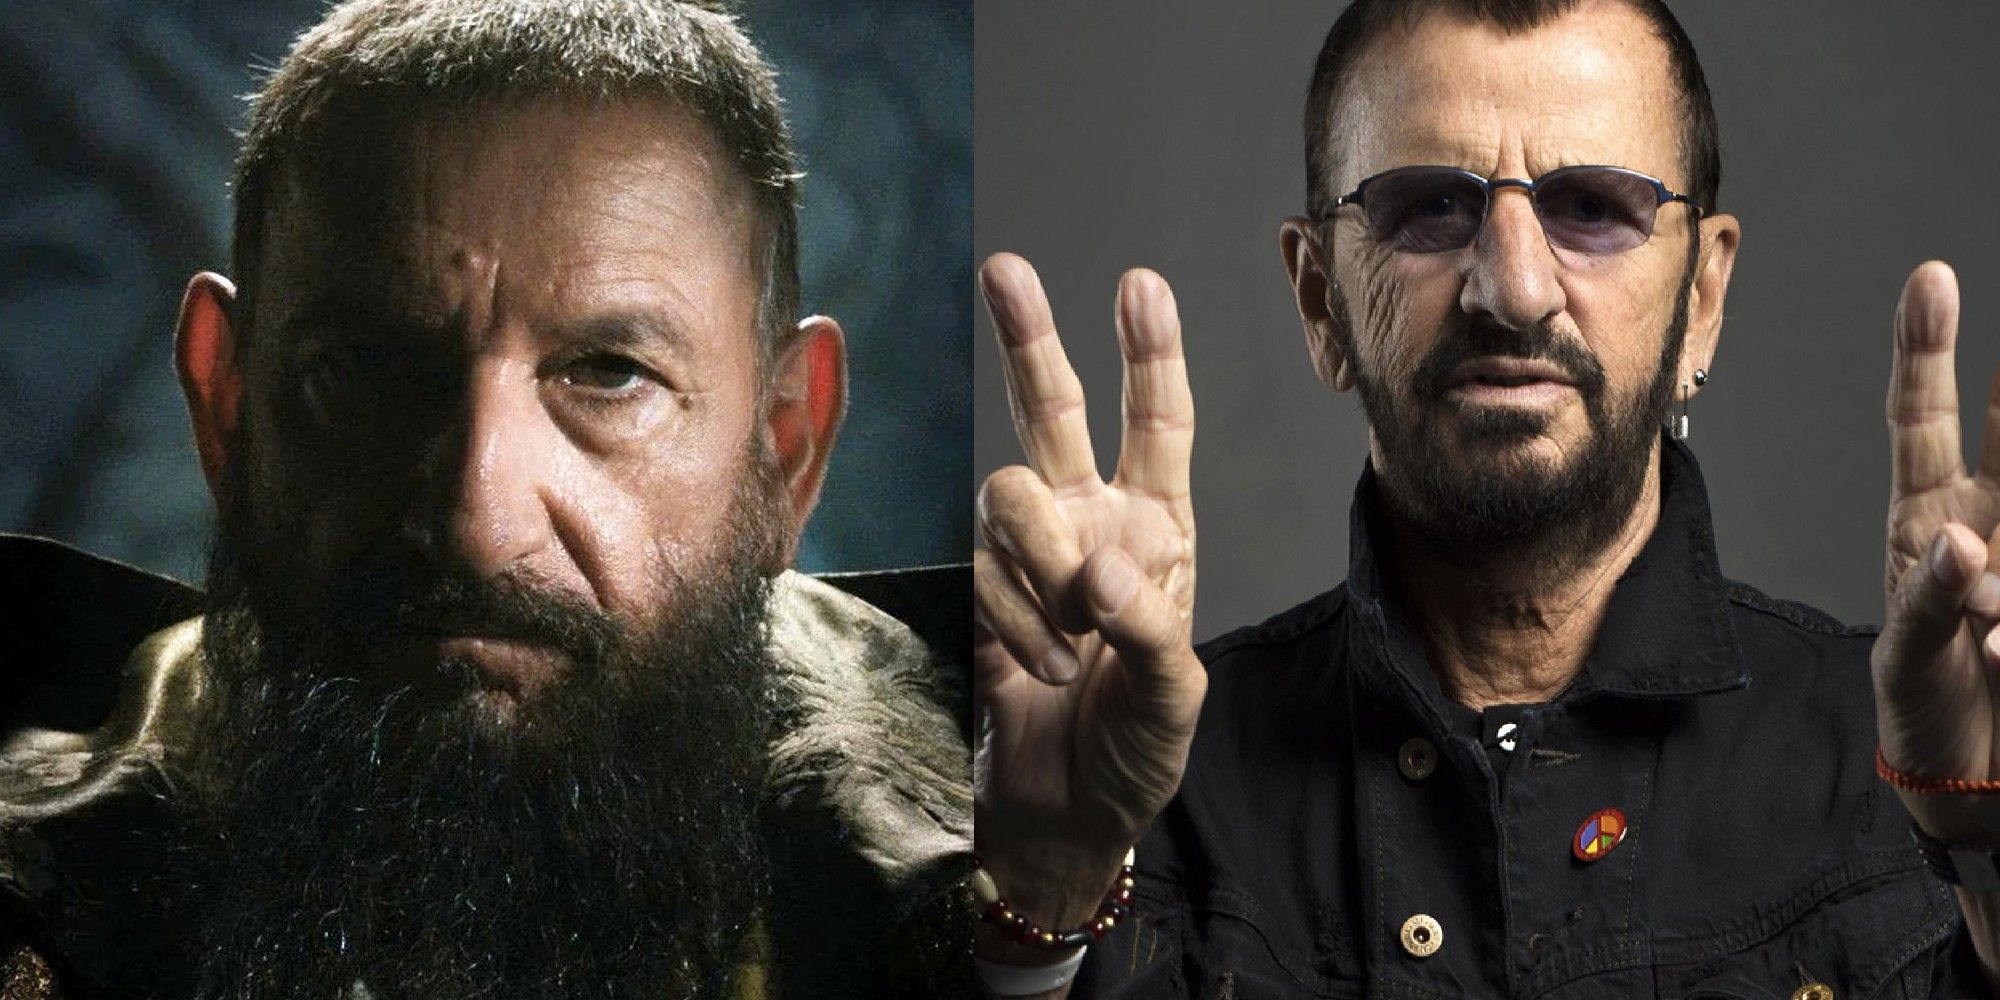 Left to right: Mandarin in Iron Man and Ringo from The Beatles